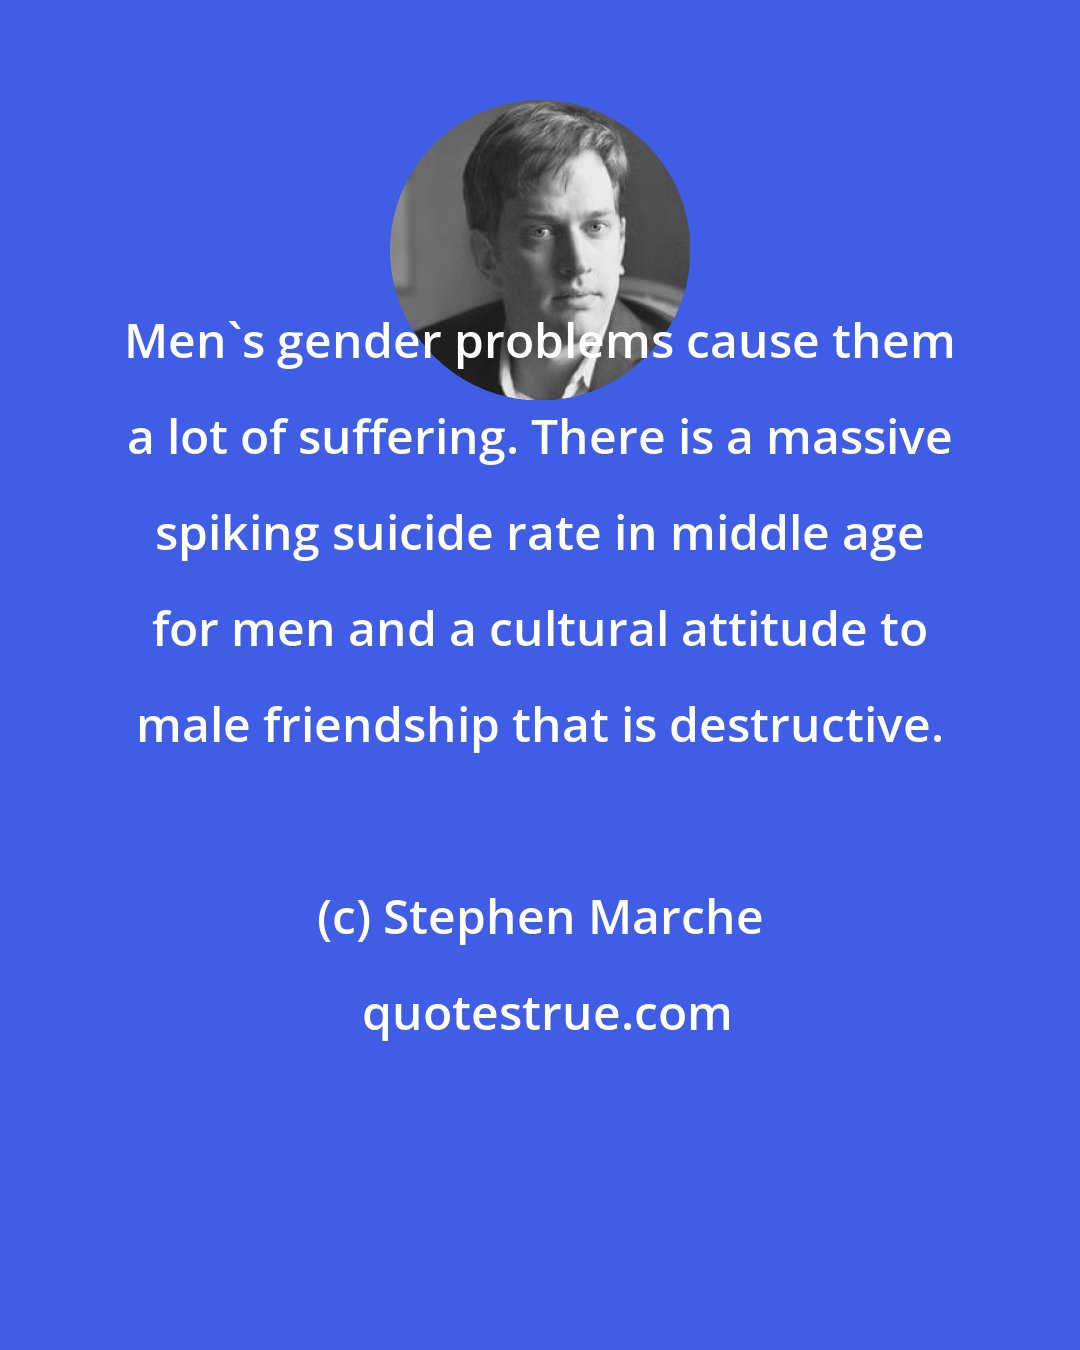 Stephen Marche: Men's gender problems cause them a lot of suffering. There is a massive spiking suicide rate in middle age for men and a cultural attitude to male friendship that is destructive.